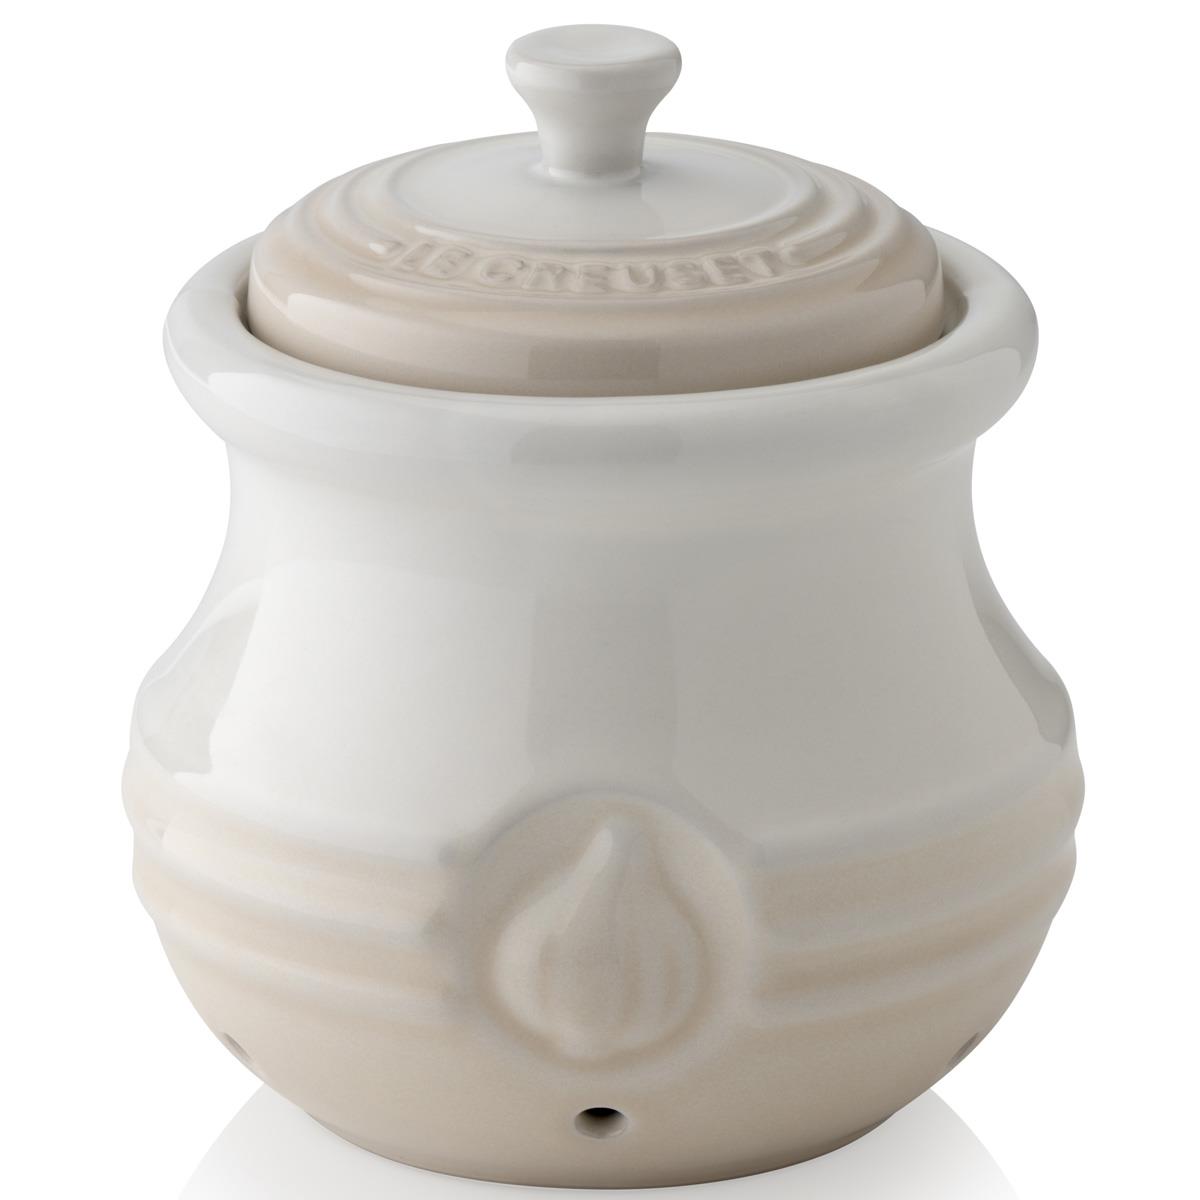 Can the Le Creuset garlic keeper be safely washed in a dishwasher?